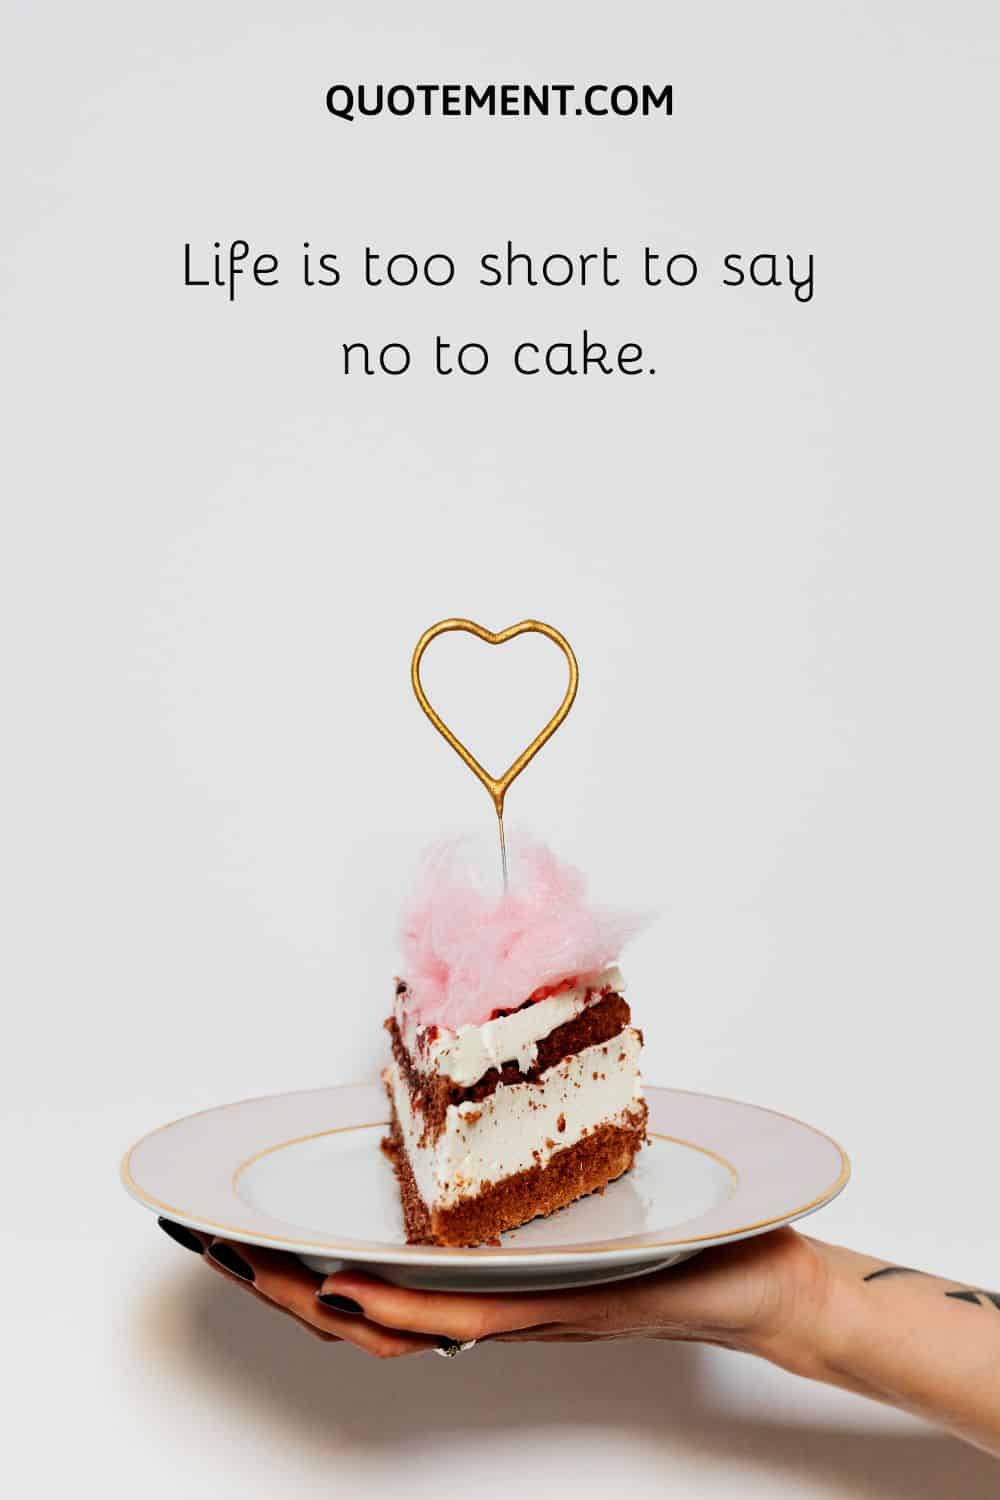 Life is too short to say no to cake